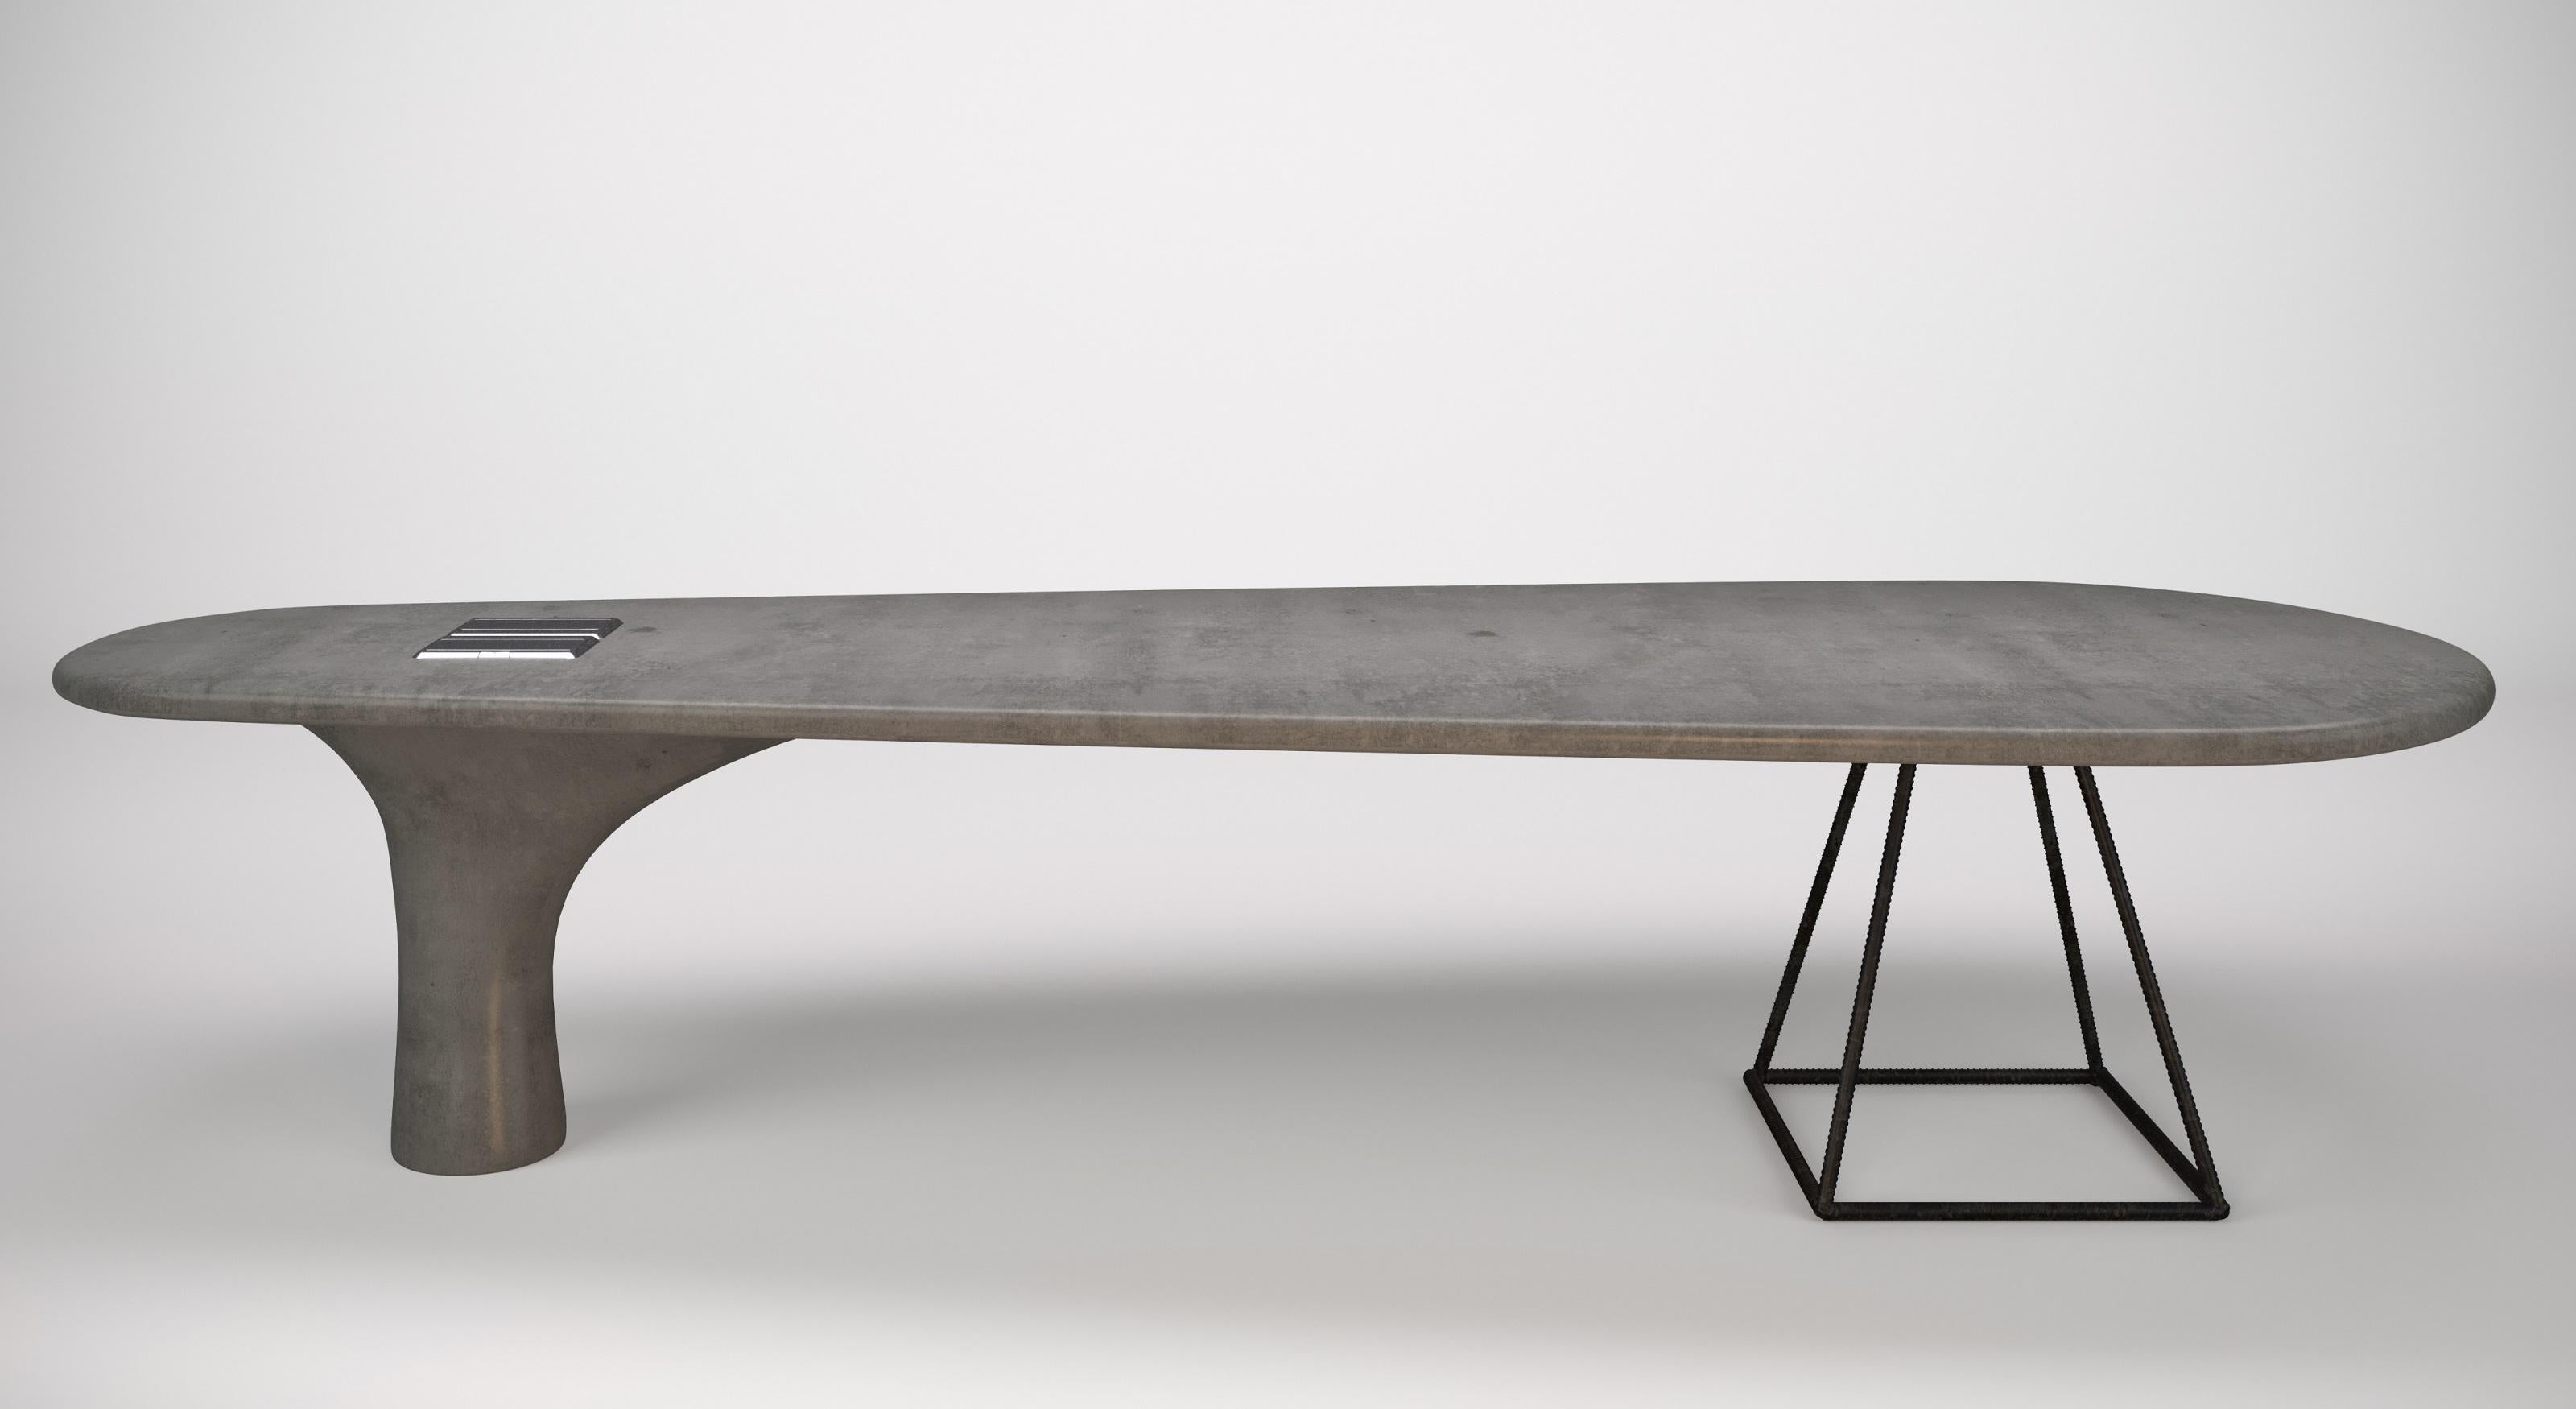 Ukrainian Comfortable Table Drop of Concrete with Rounded Shapes for Minimalist Interior For Sale